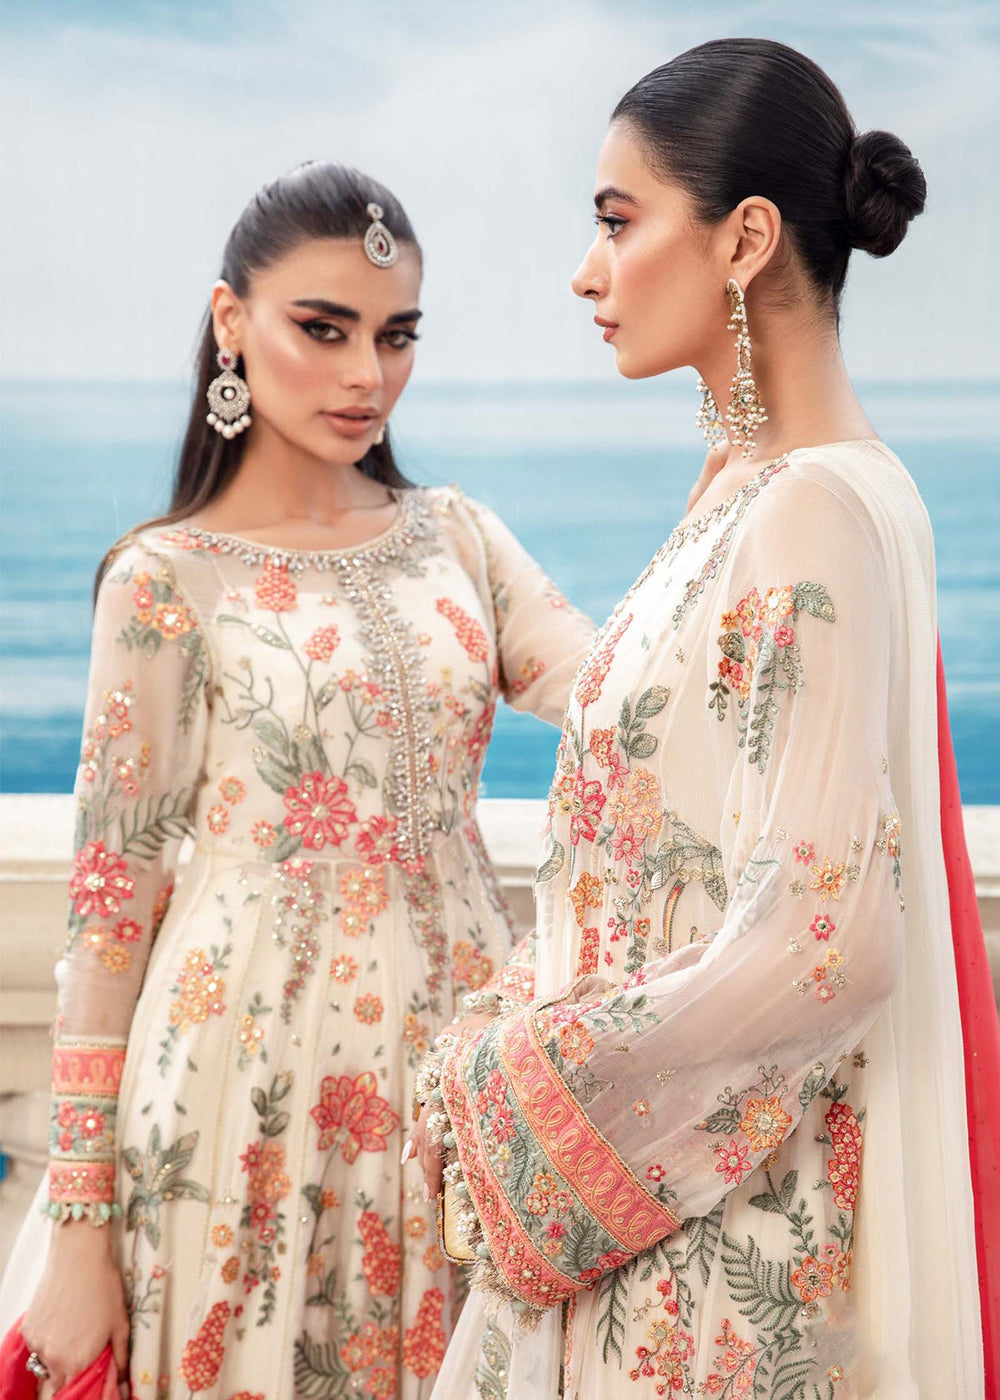 Buy Now Chiffon Formals 2023 by Maria B | MPC-23-106 Cloud White Floral Online in USA, UK, Canada & Worldwide at Empress Clothing.